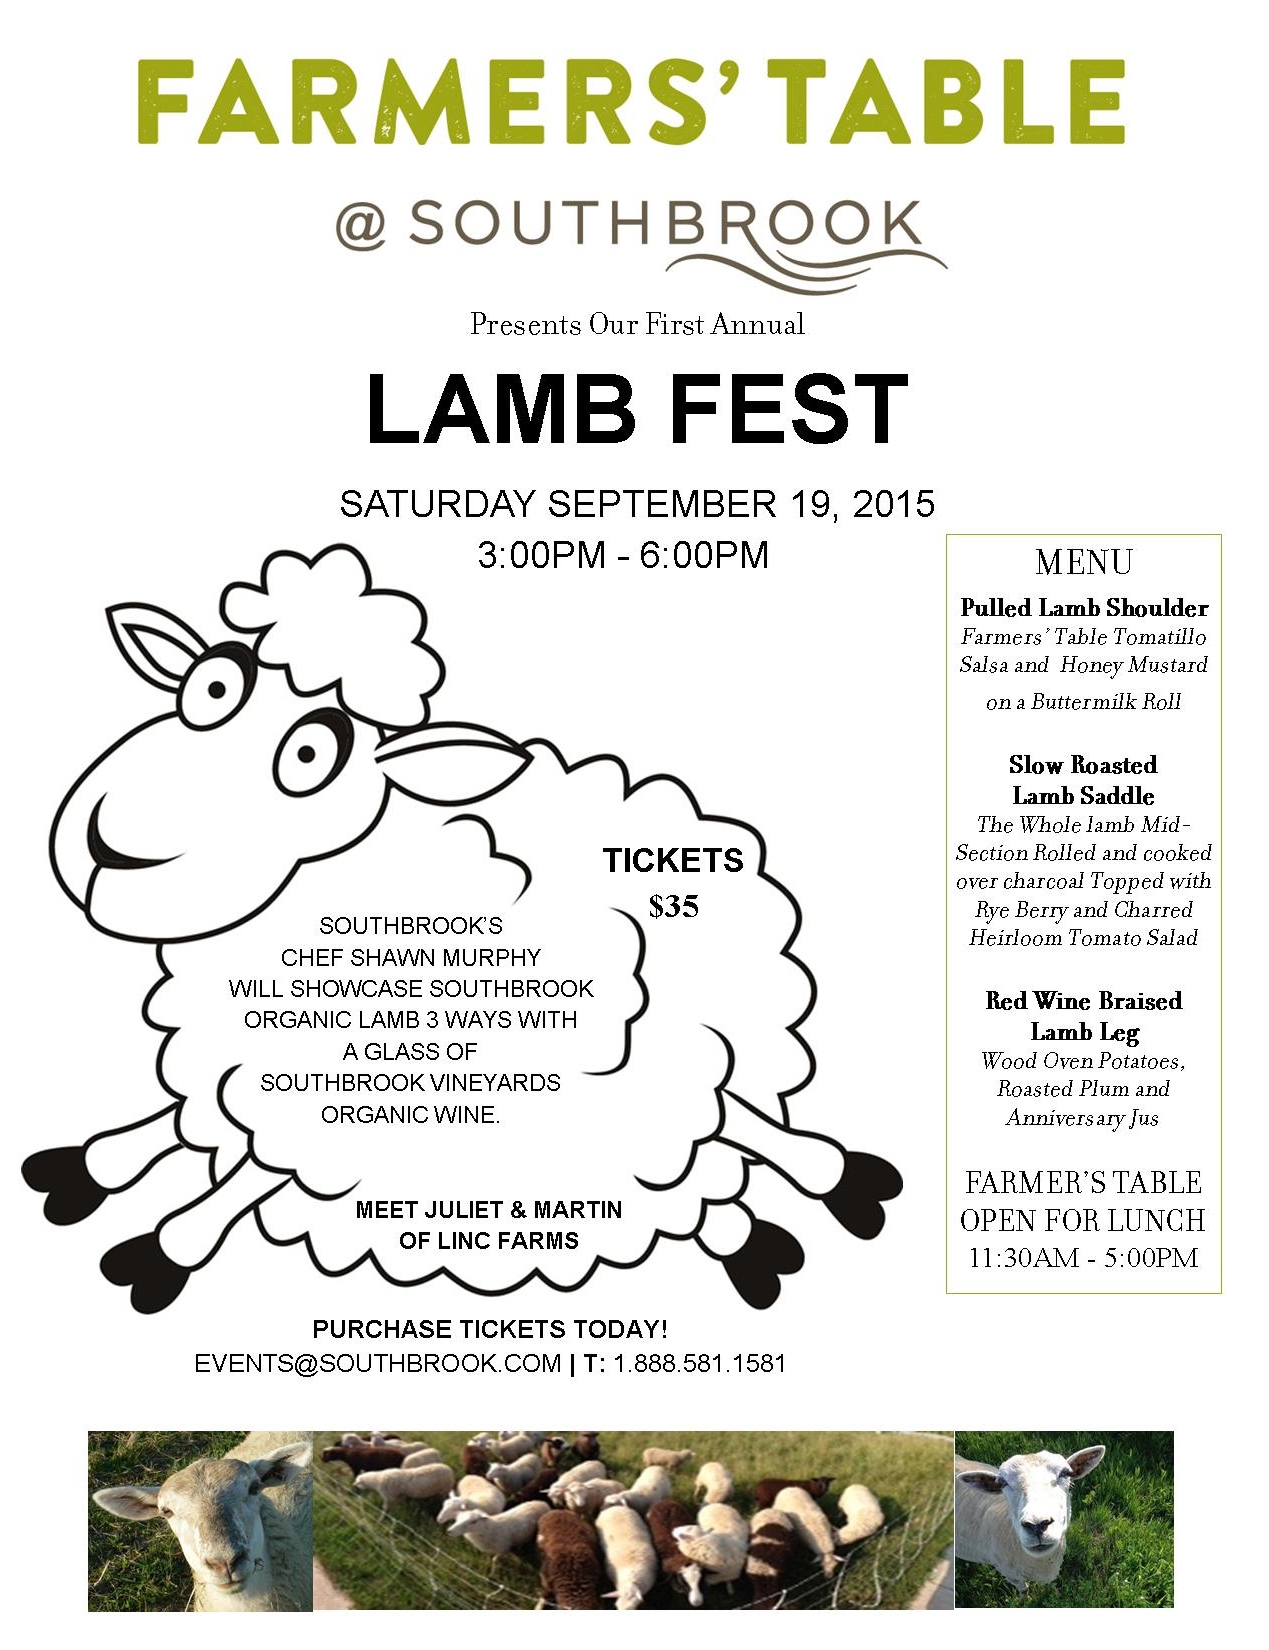 Southbrook Vineyards Presents Farmers’ Table @Southbrook’s First Annual Lamb Fest